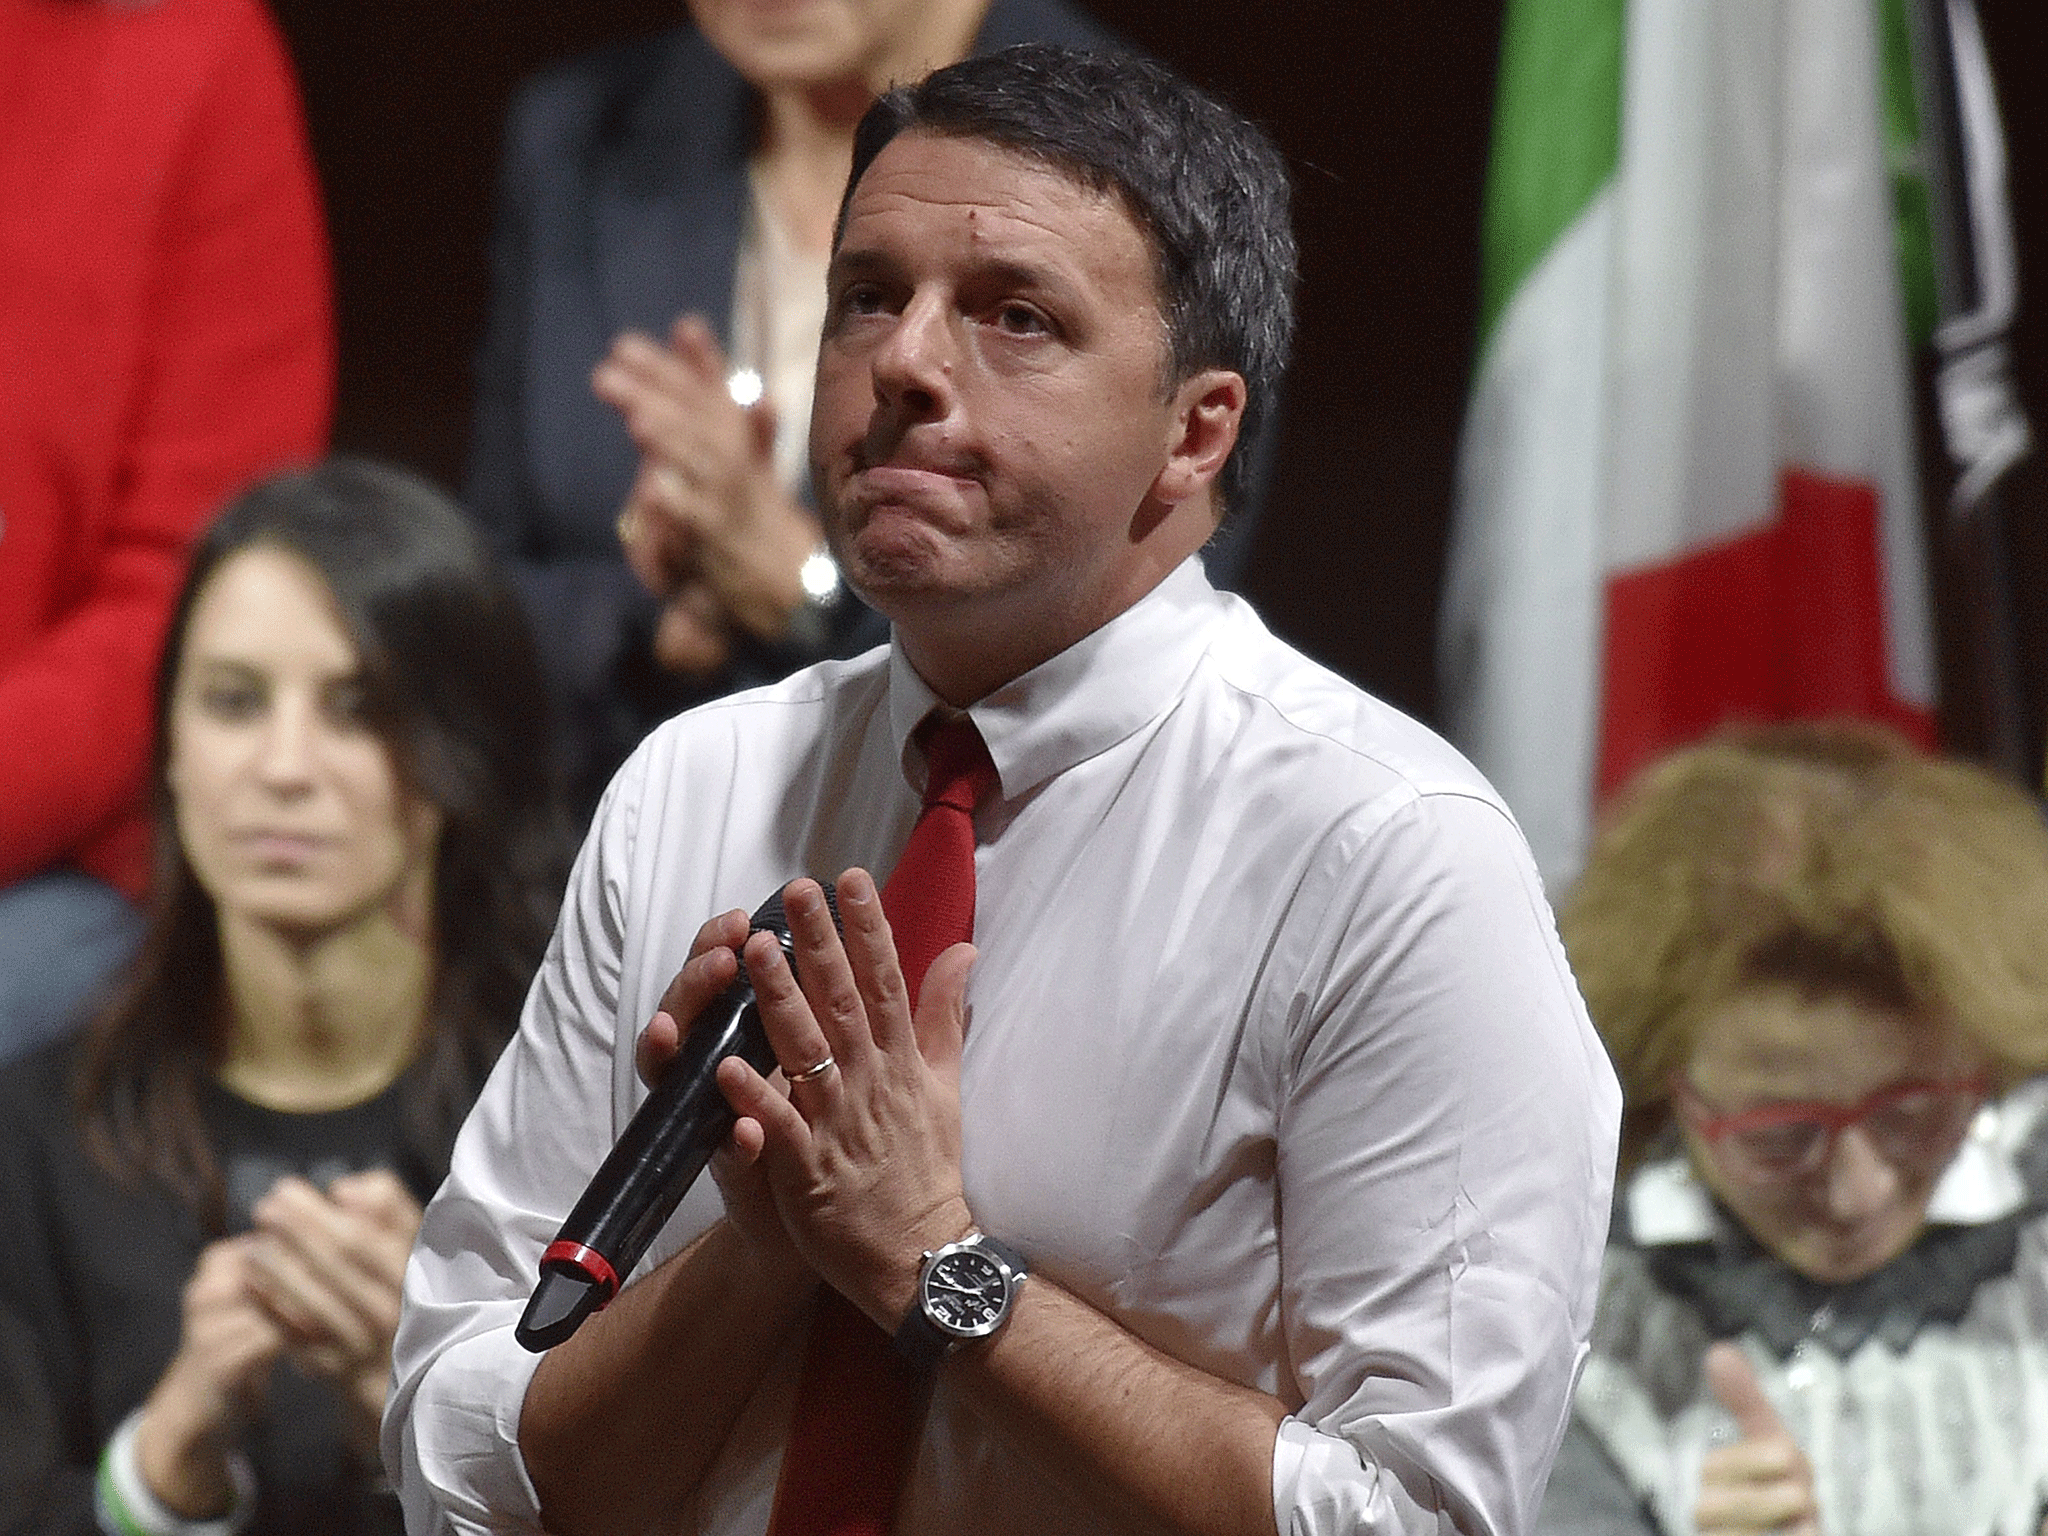 Does Renzi’s exit spell disaster for the EU project?